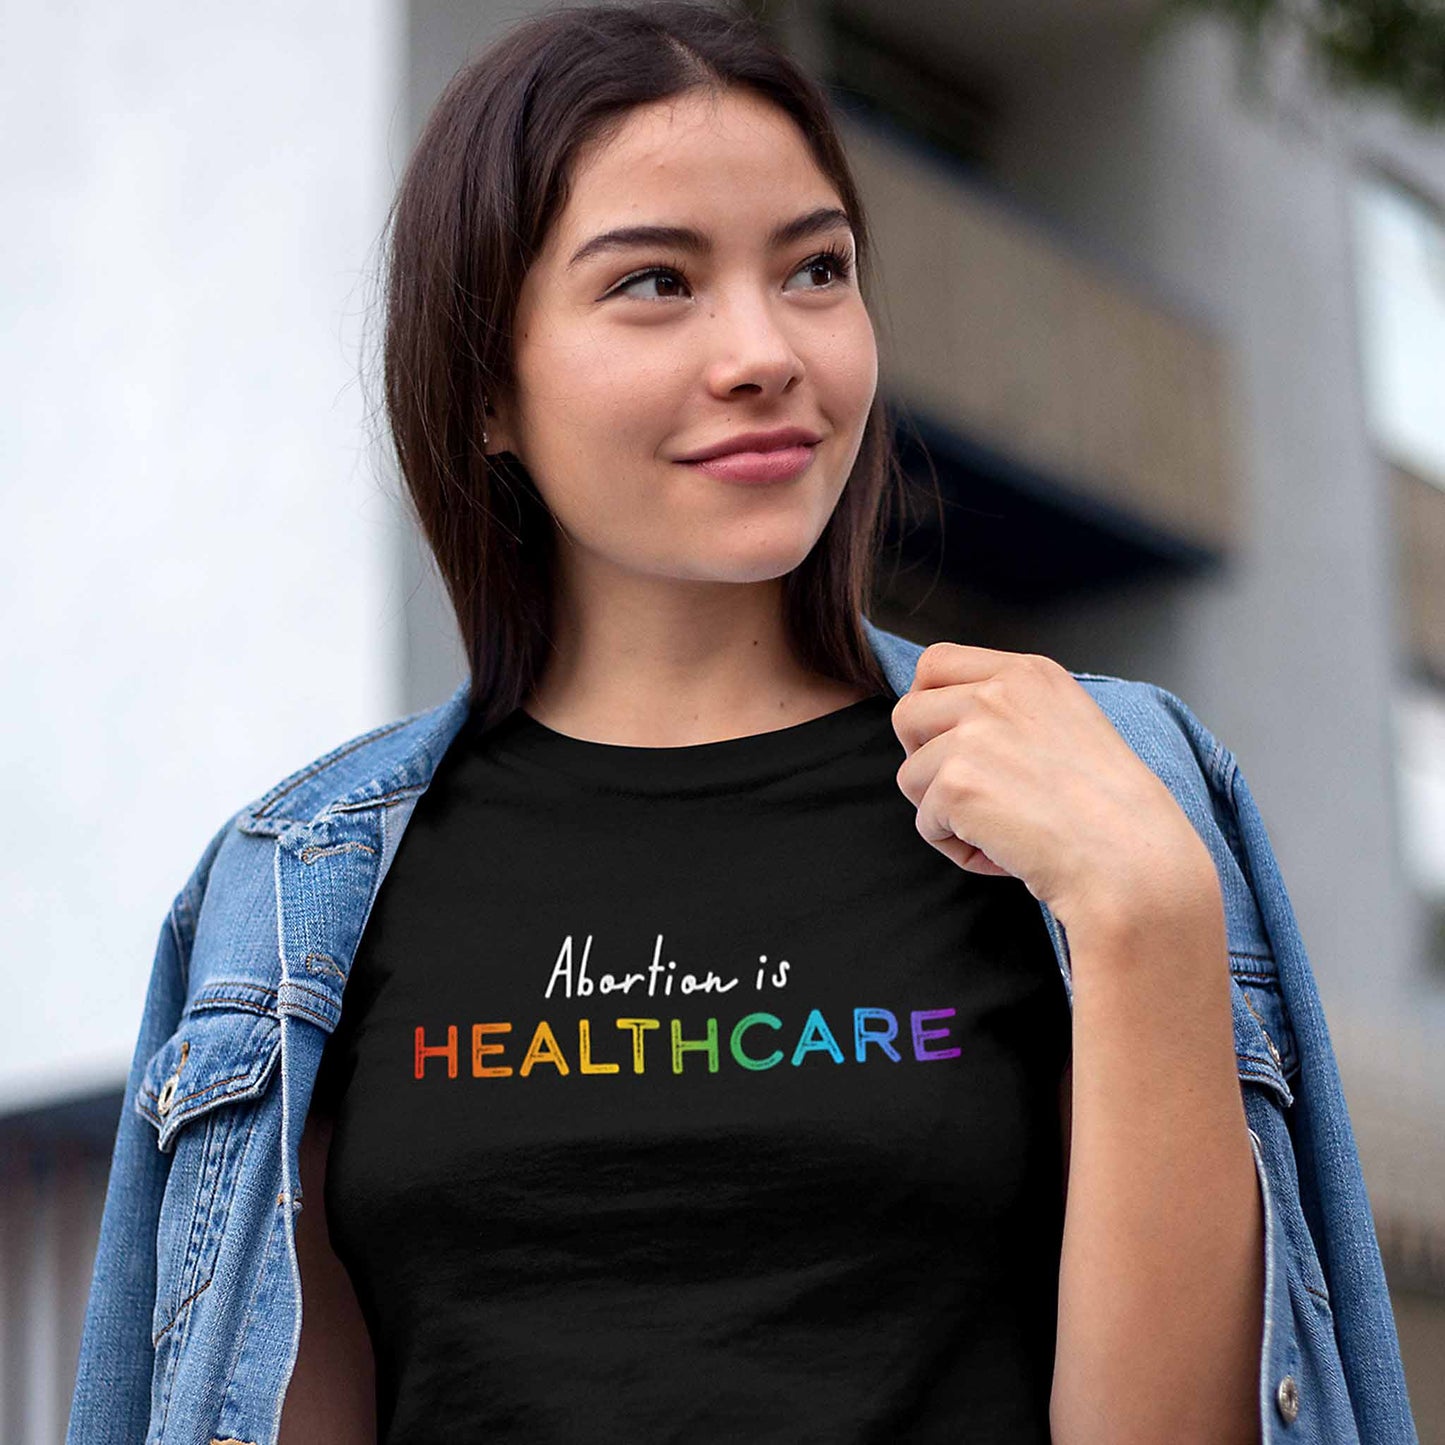 Black unisex t-shirt that says, “Abortion is Healthcare.” The words “Abortion is” is in a script font, and “Healthcare” is in all caps in a rainbow gradient color.